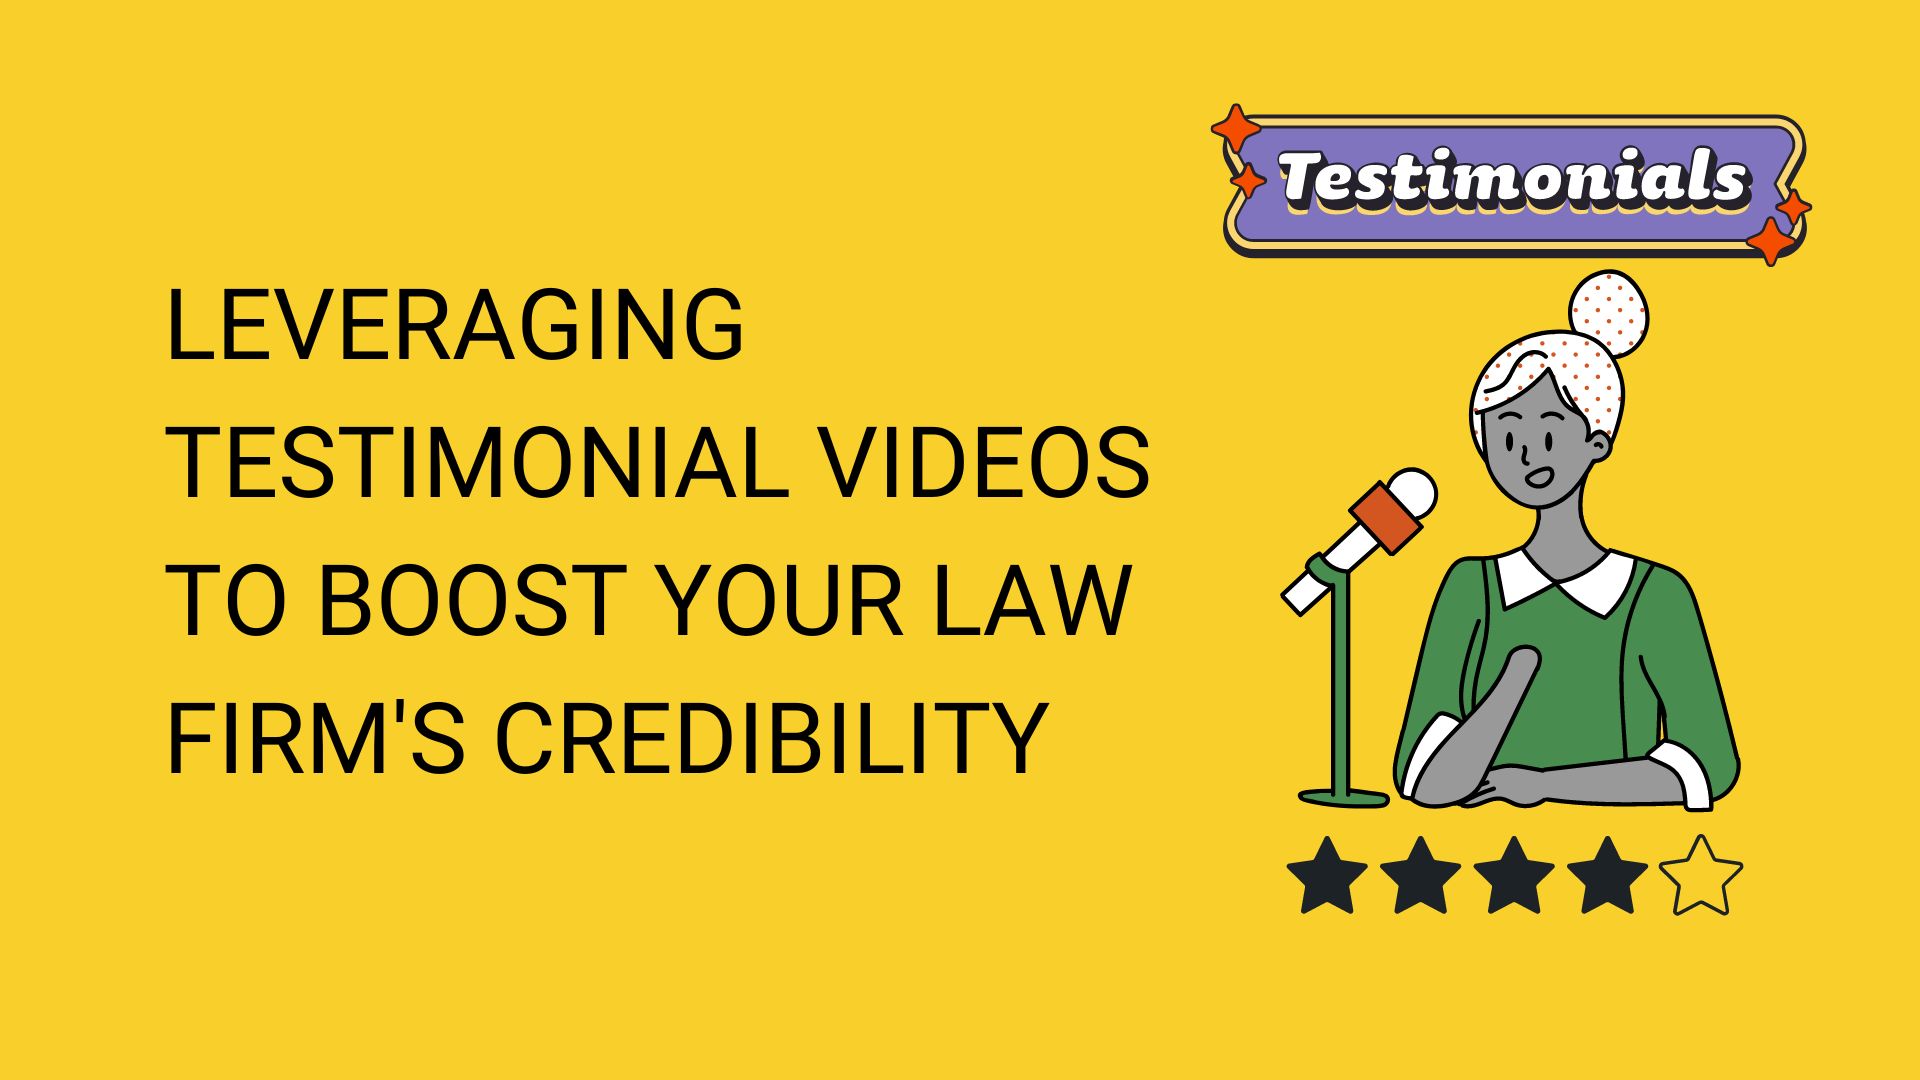 Leveraging Testimonial Videos to Boost Your Law Firm’s Credibility